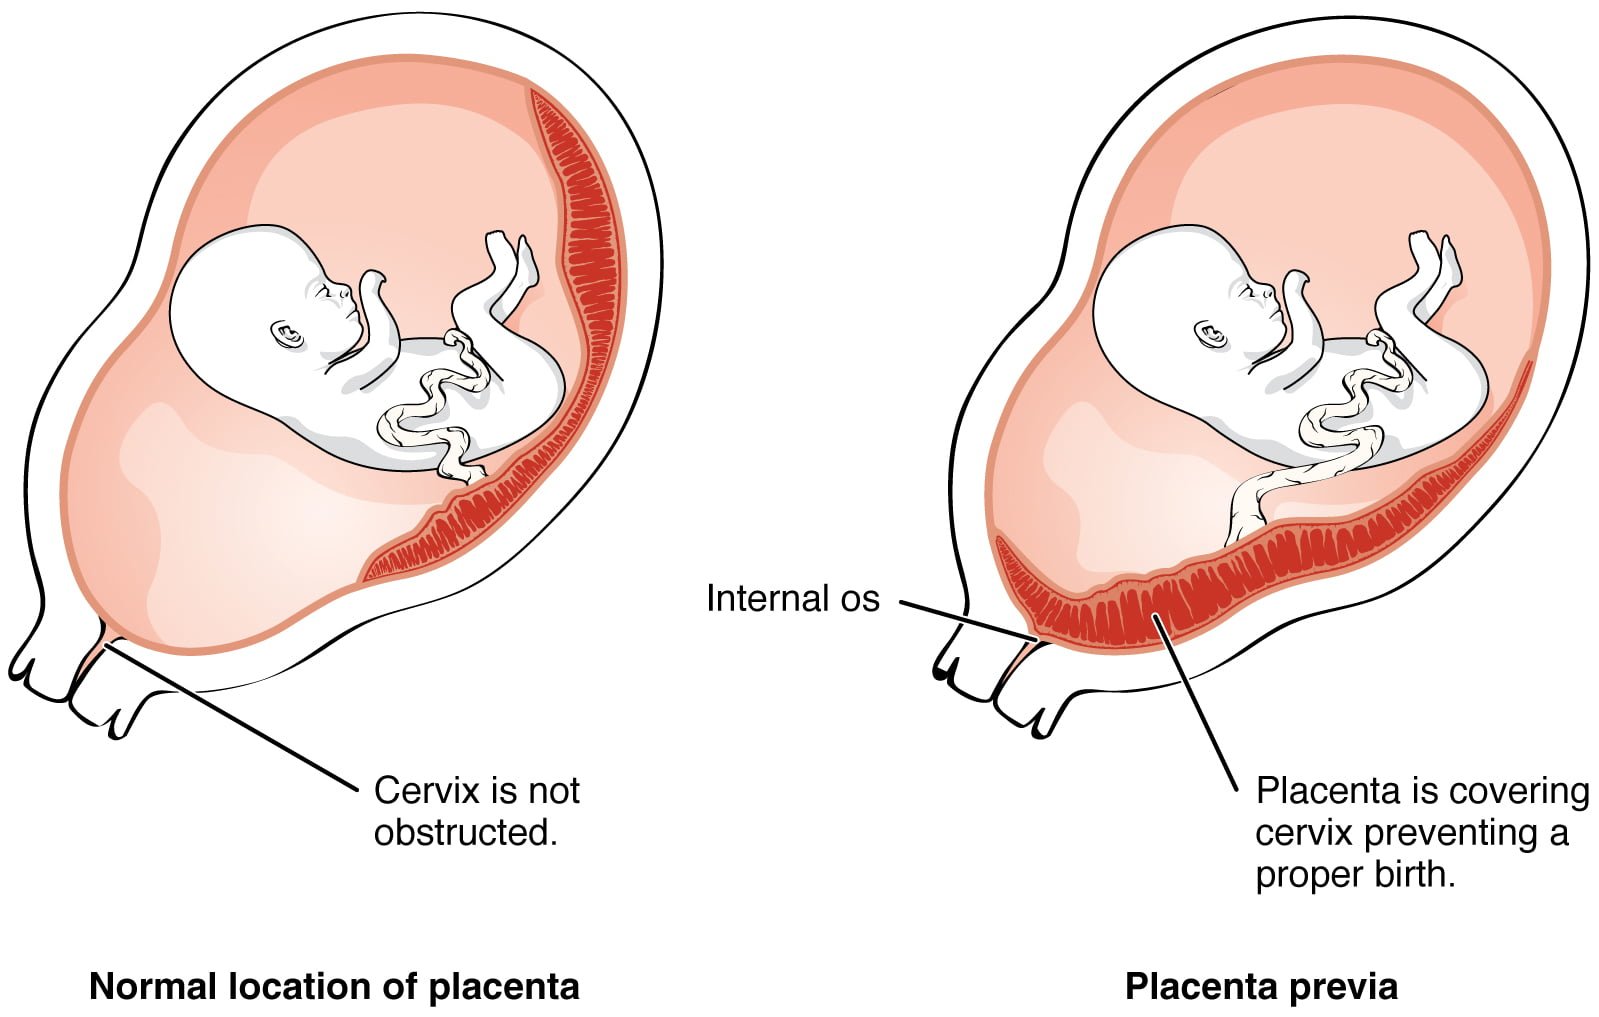 What is placenta previa? - AskDrManny